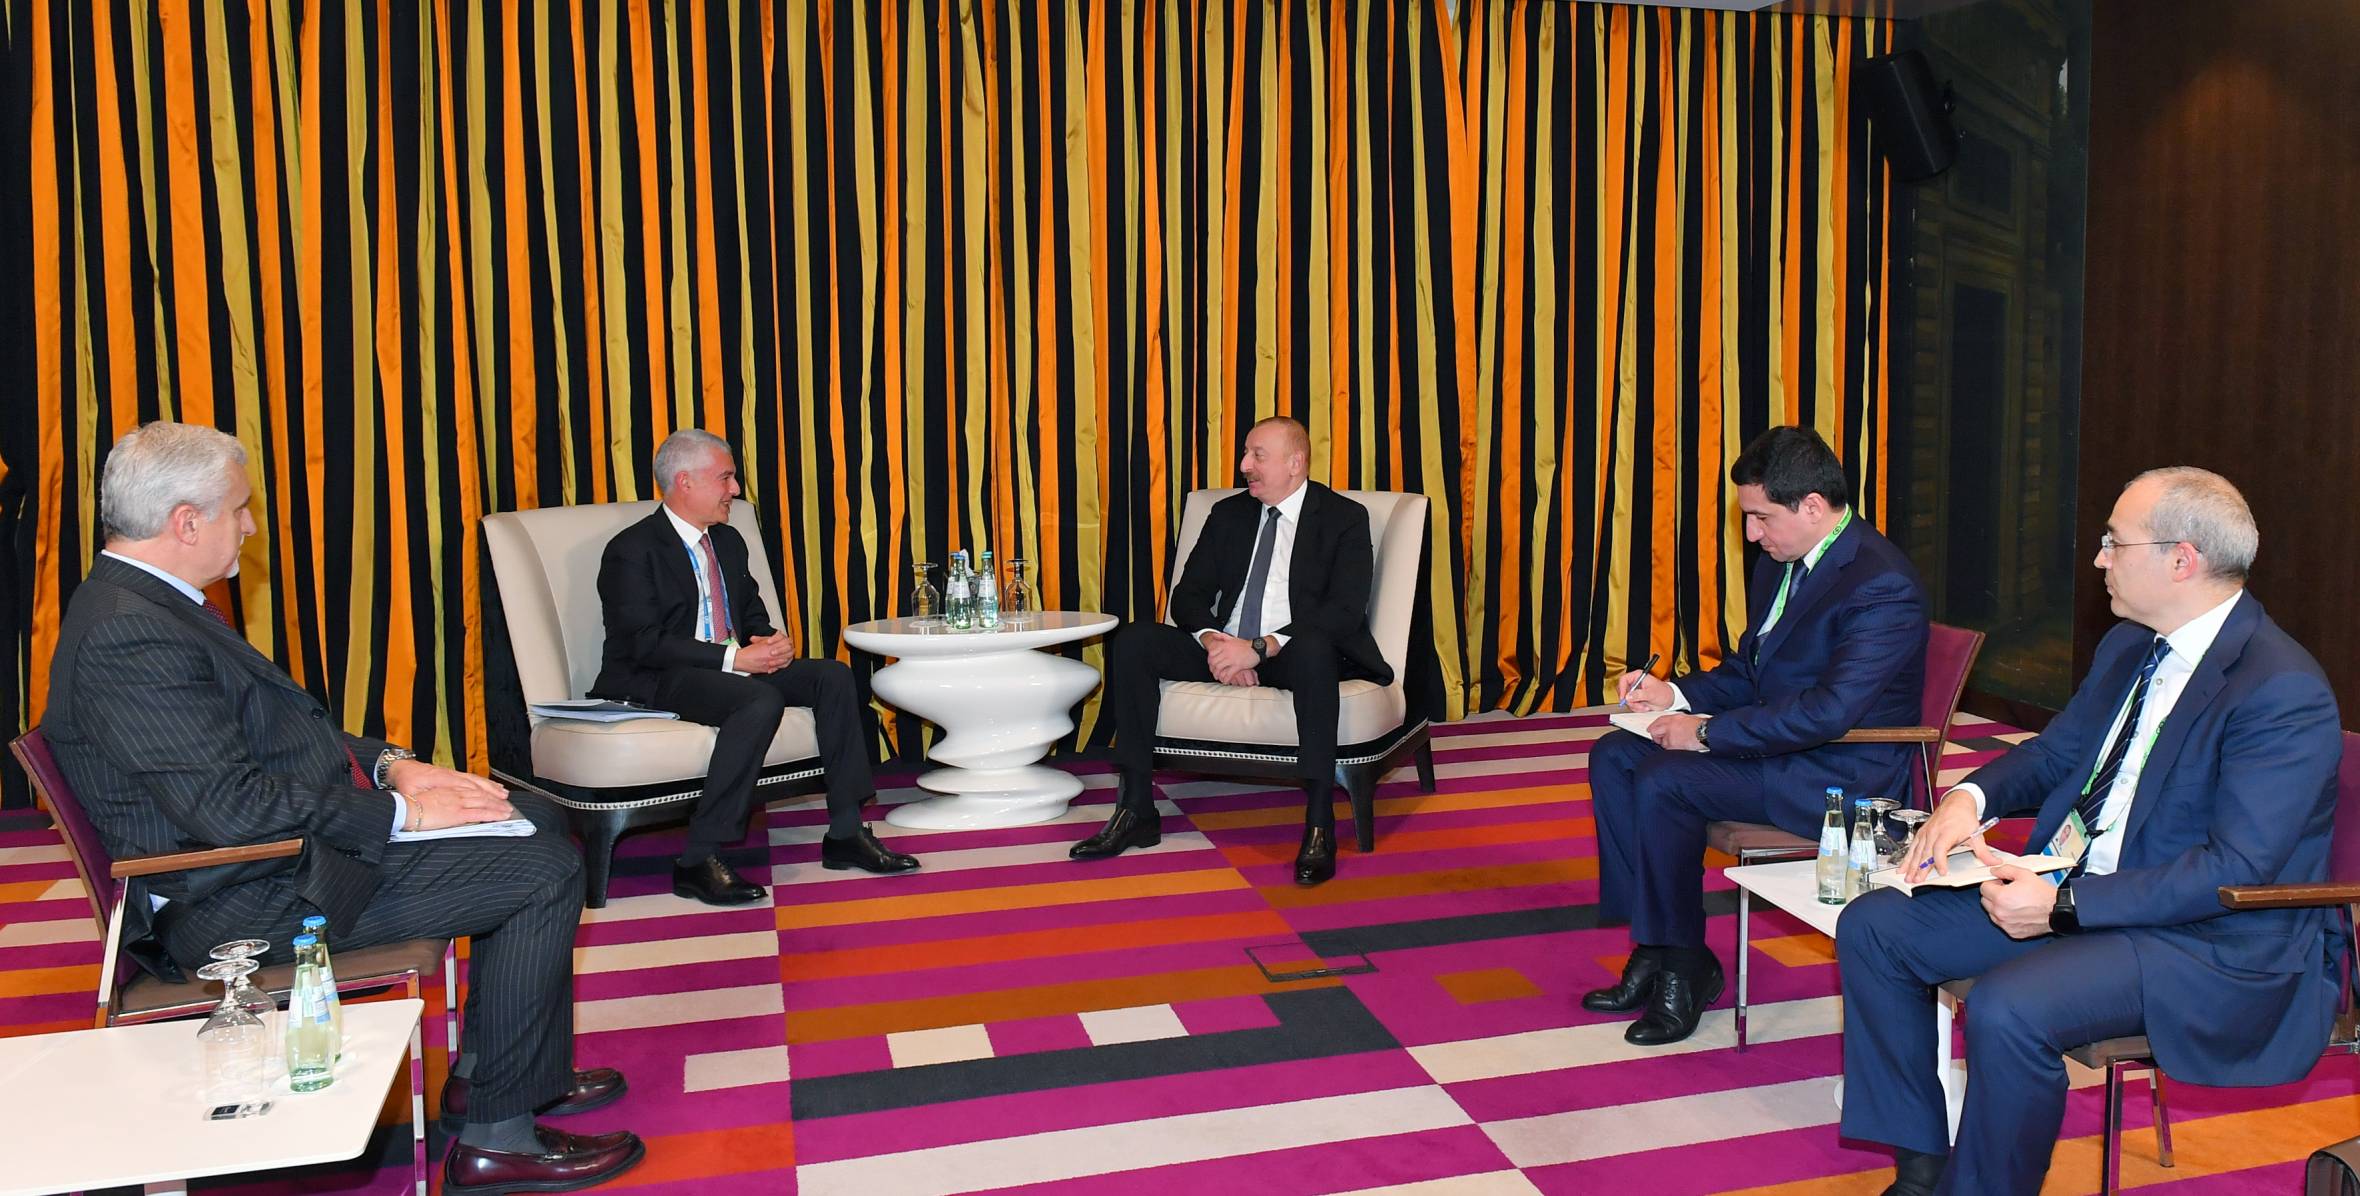 Ilham Aliyev met with Co-General Manager of Leonardo S.p.A in Munich